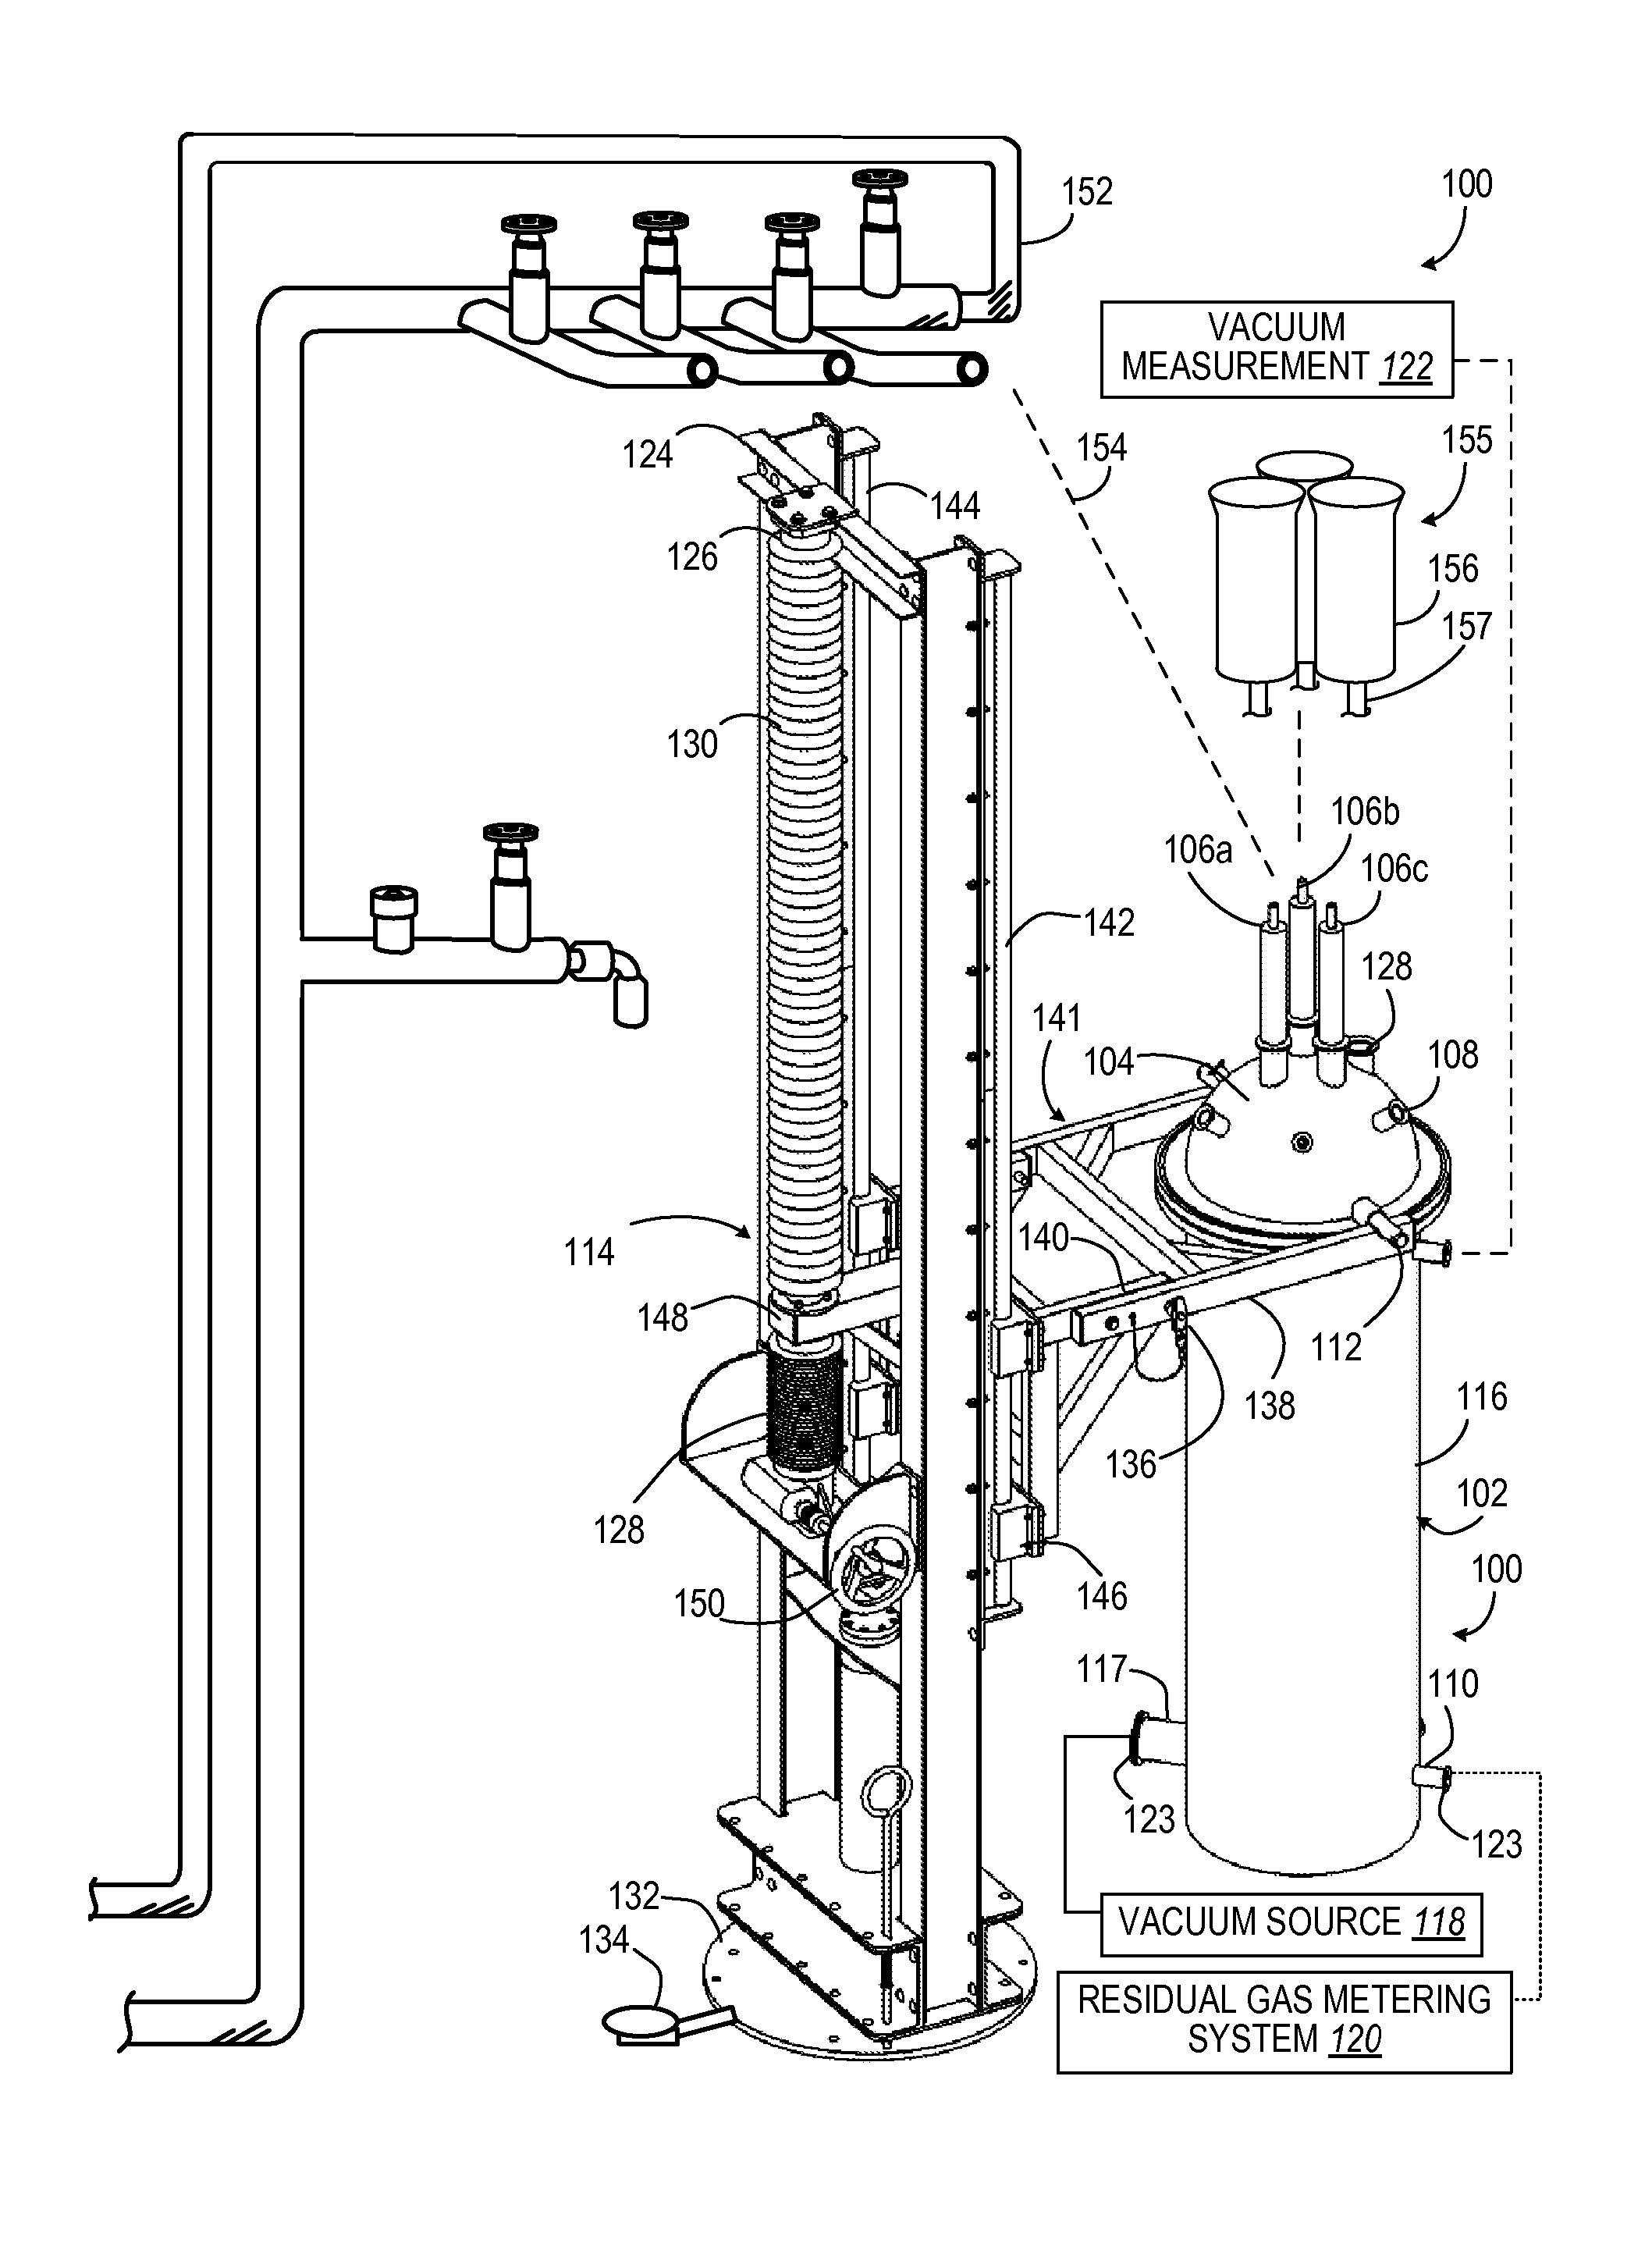 Insulation Test Cryostat with Life Mechanism